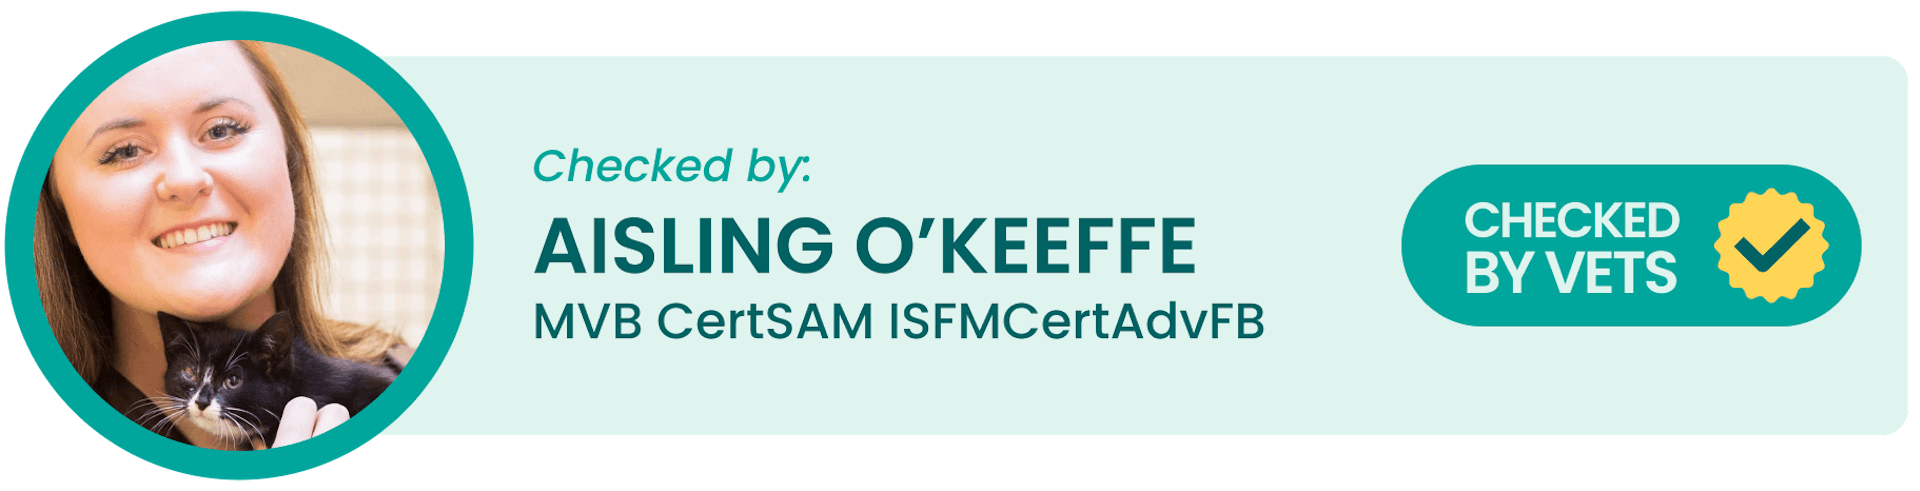 Checked by: Aisling O'Keeffe MVB CertSAM ISFMCertAdvFB